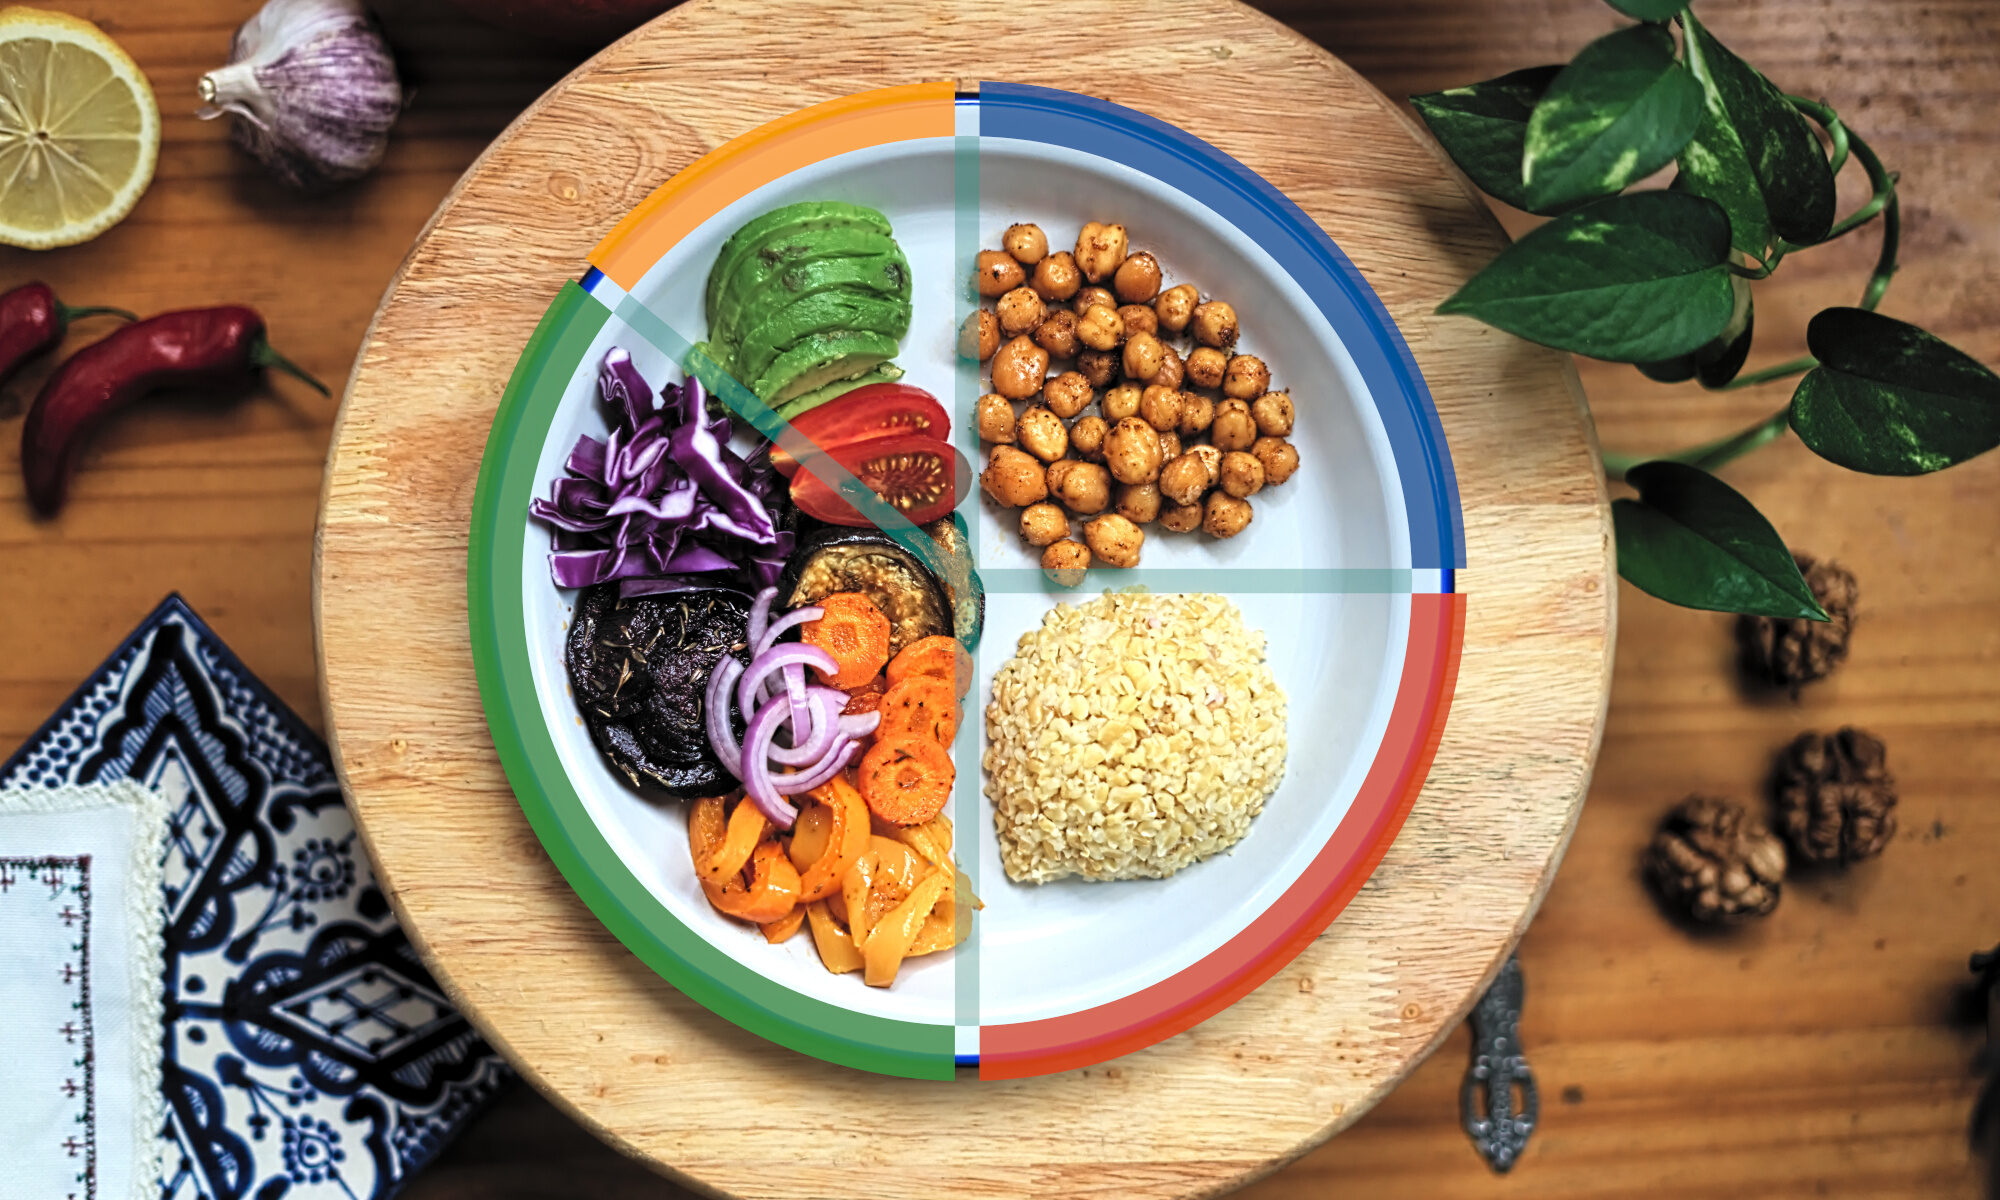 JustaPlate Meal Tracker App Header image with avocado, vegetables mix, chickpeas and brown rice